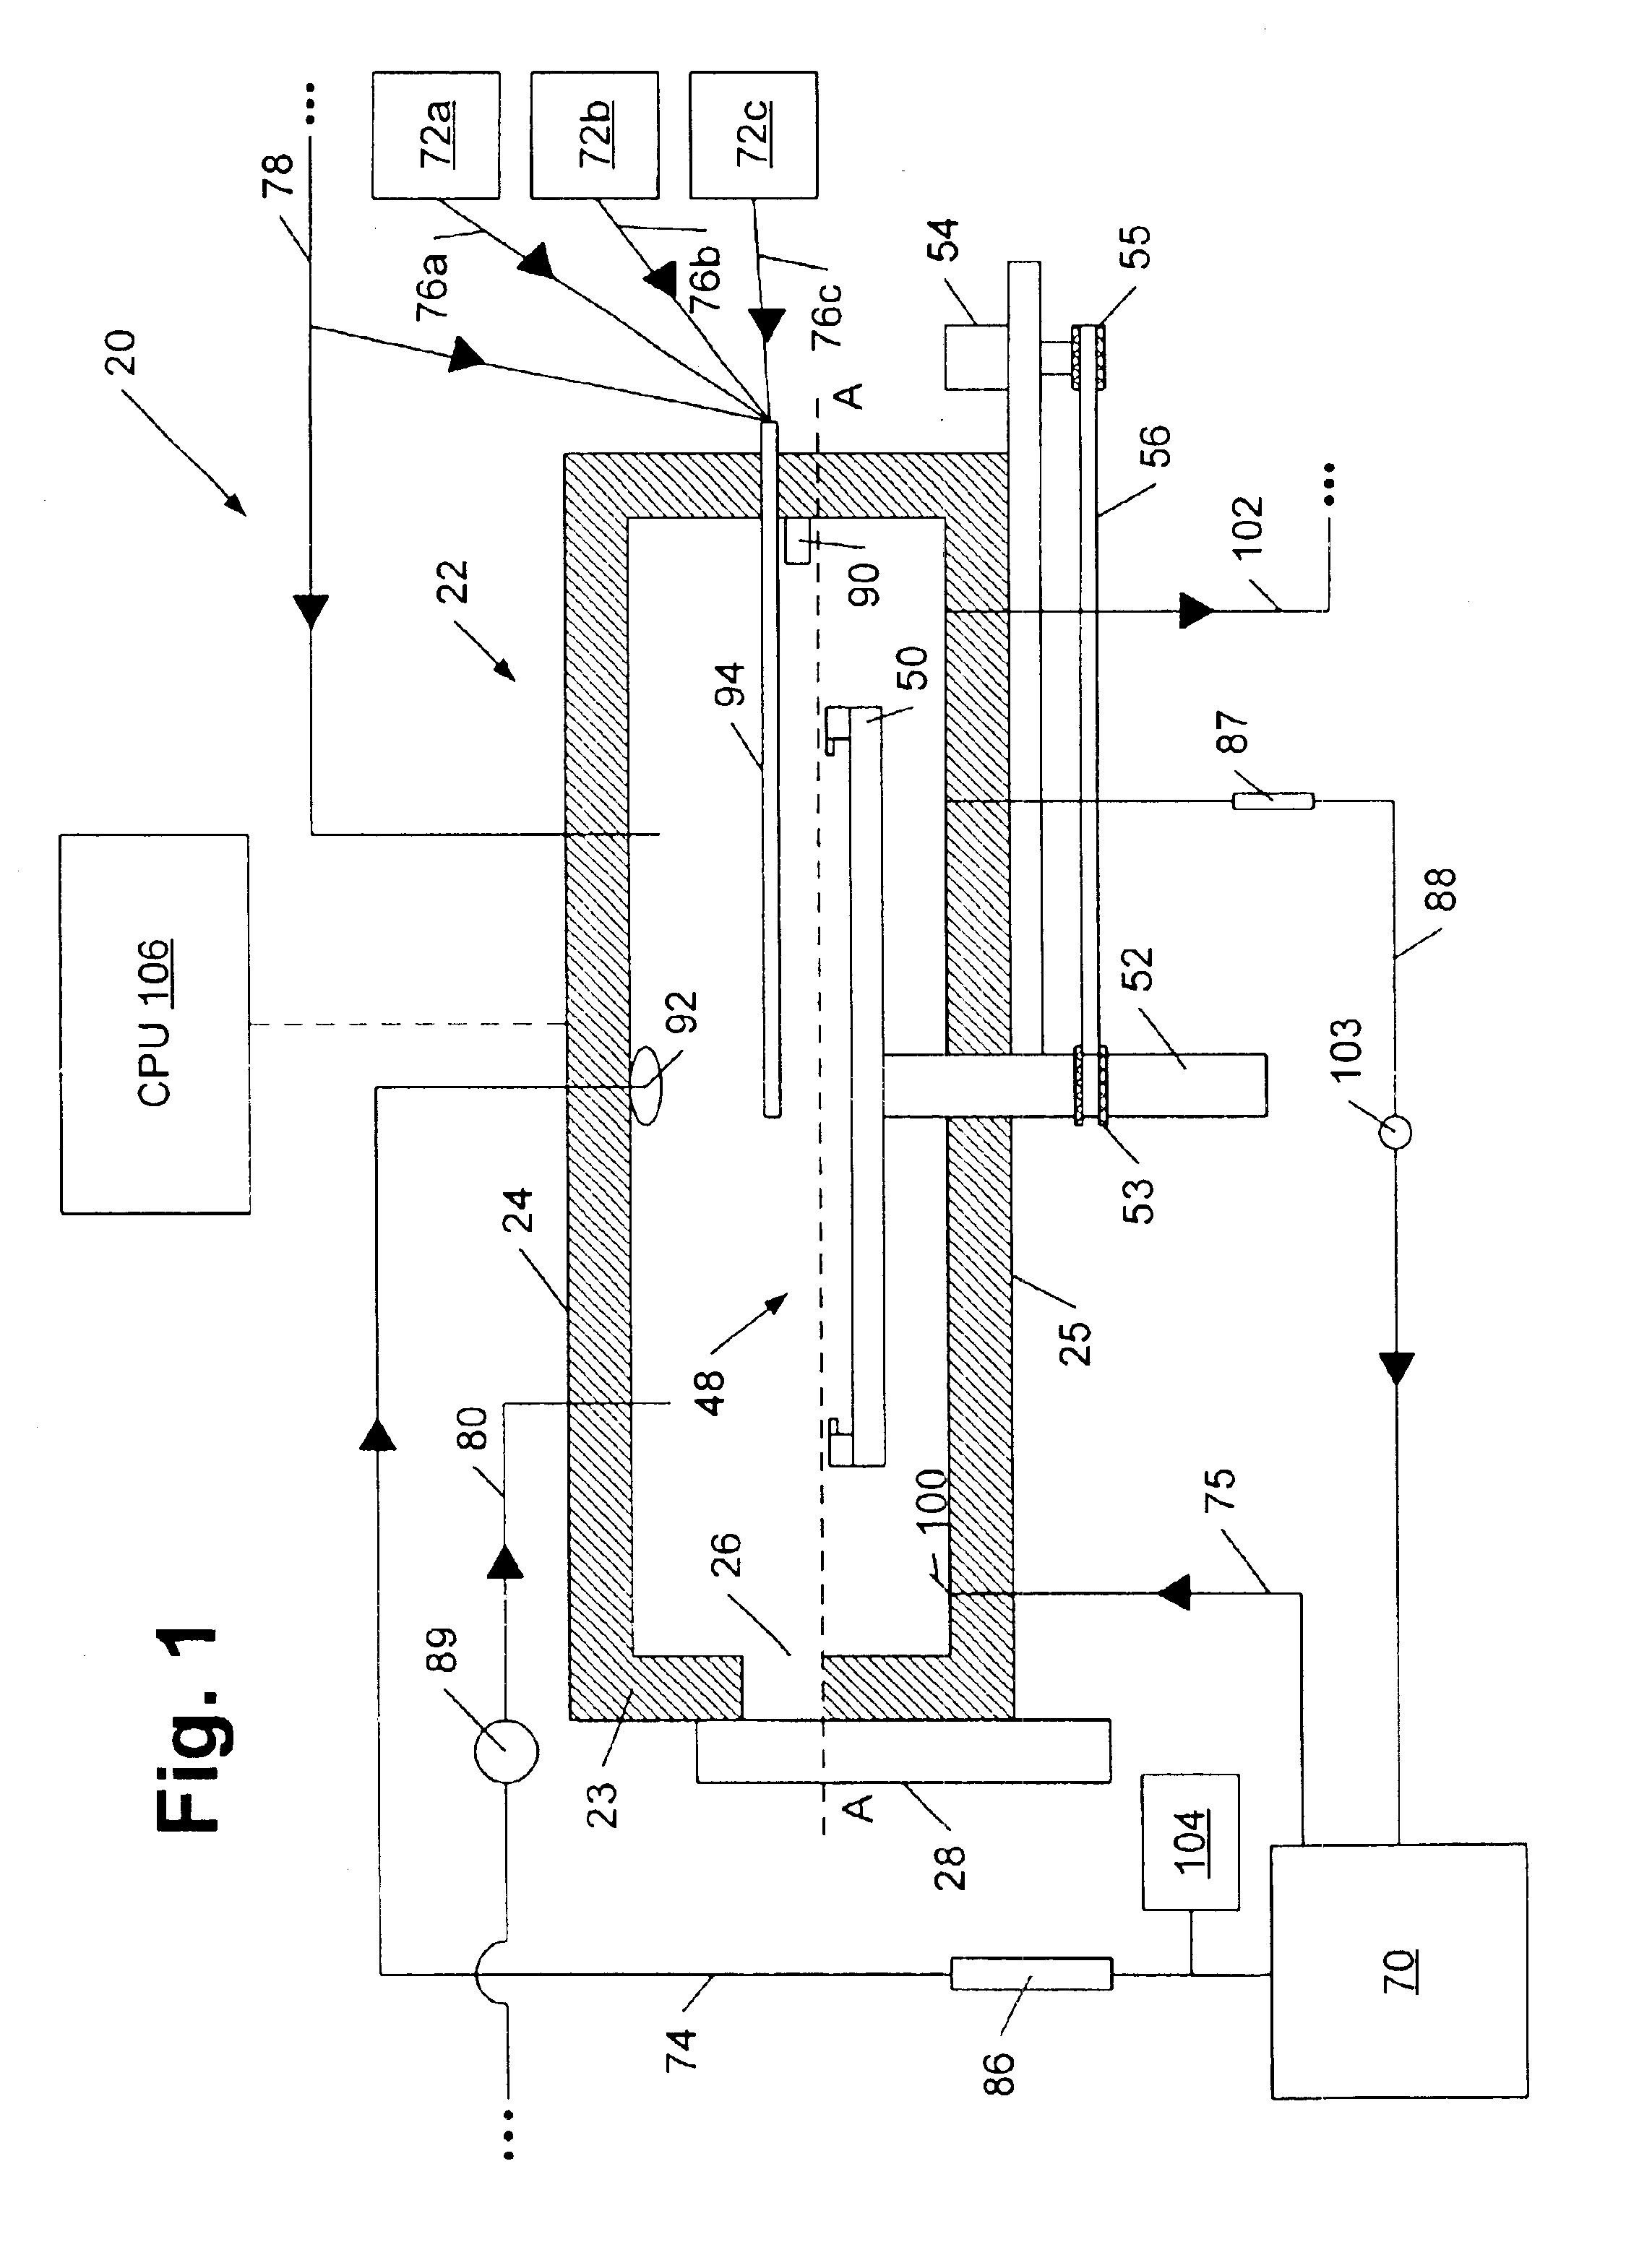 Microelectronic fabrication system components and method for processing a wafer using such components